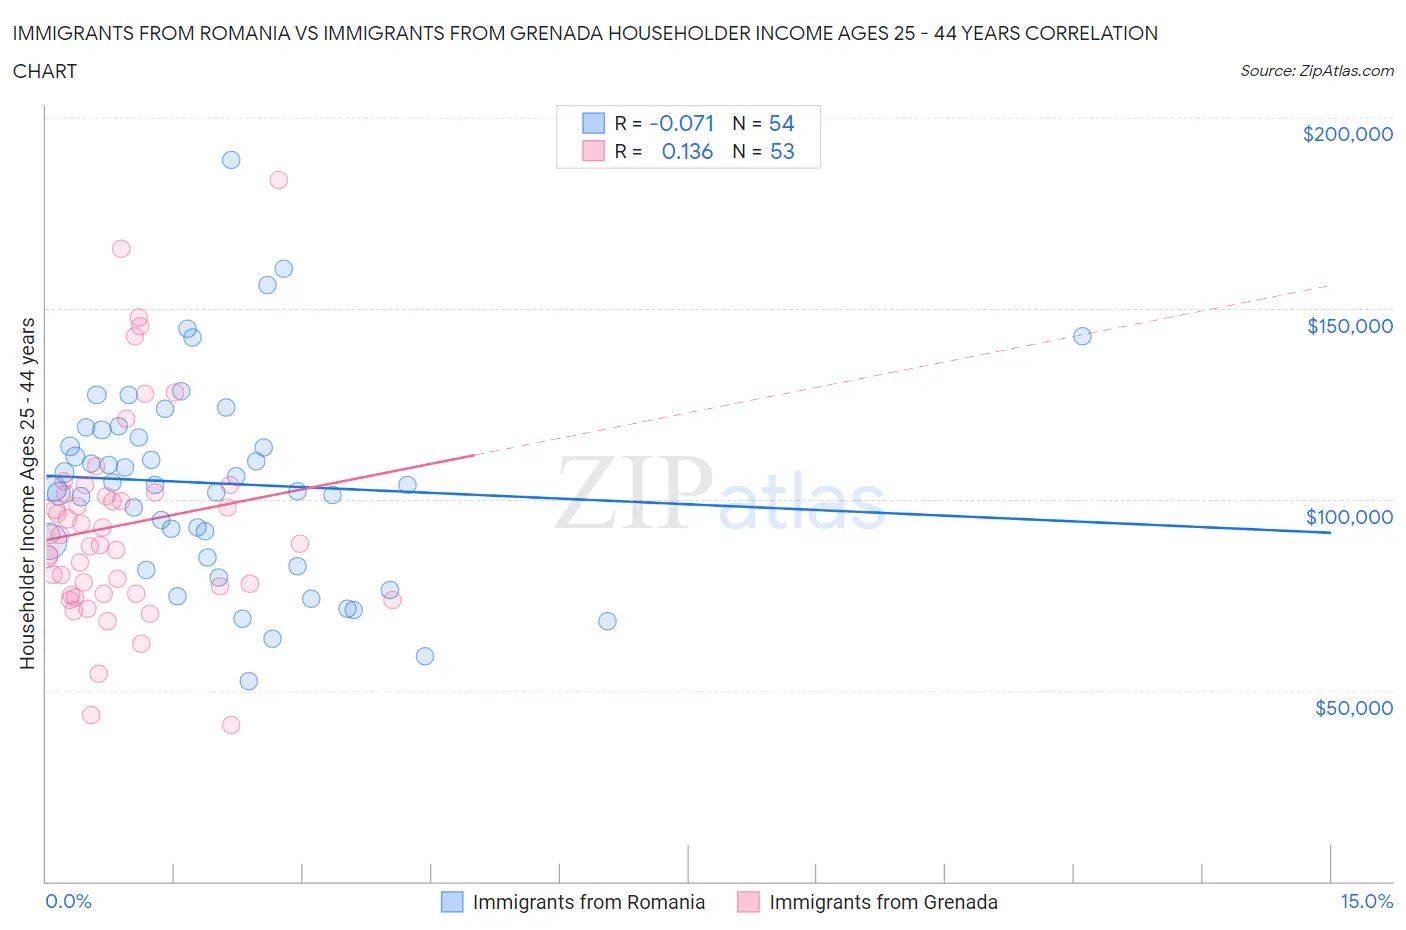 Immigrants from Romania vs Immigrants from Grenada Householder Income Ages 25 - 44 years